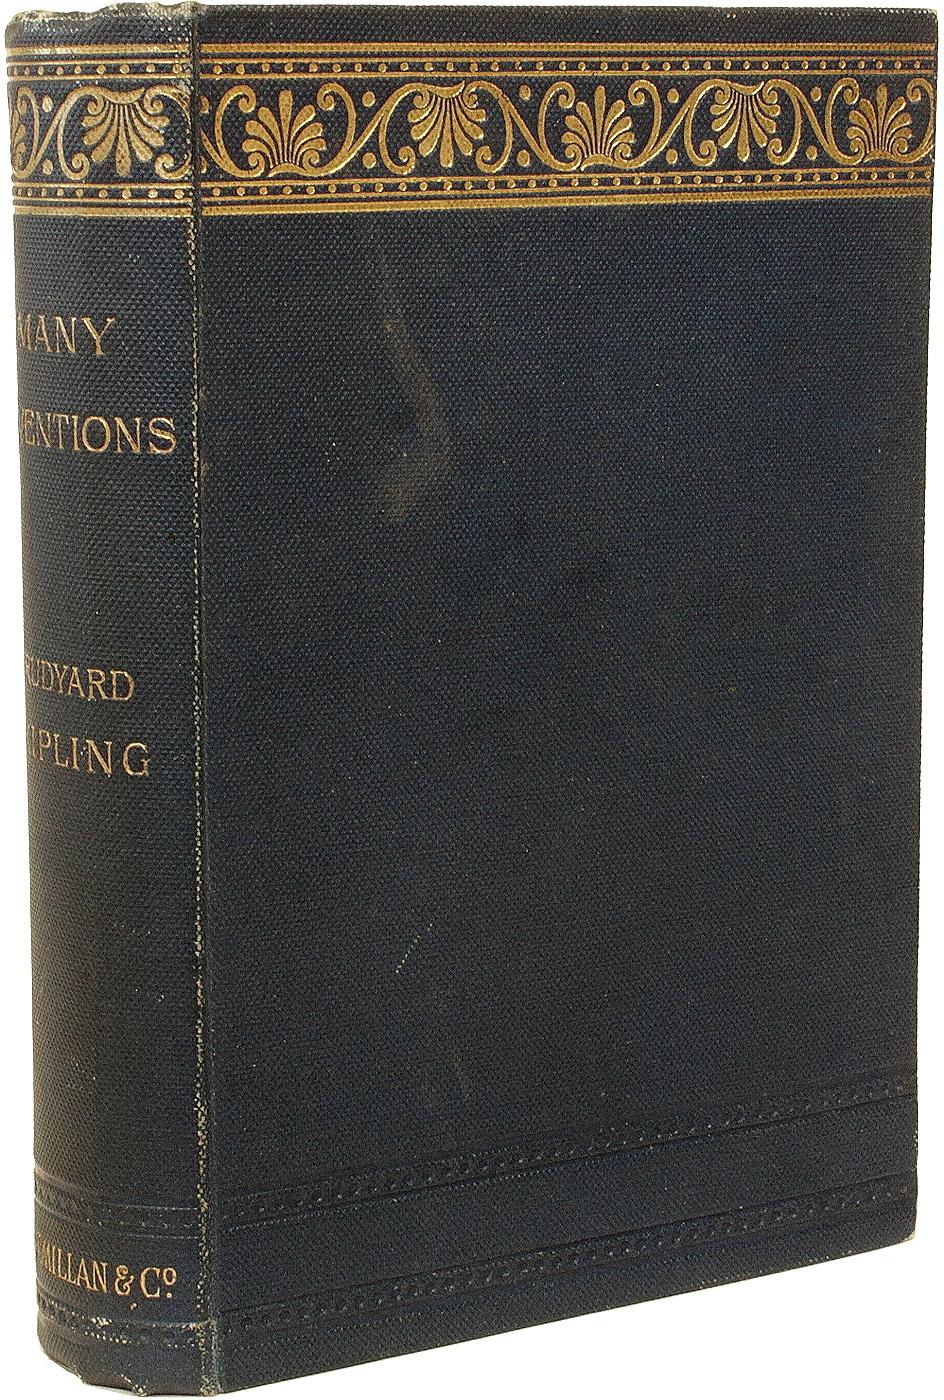 British Rudyard KIPLING. Many Inventions. 1893 - FIRST EDITION - SIGNED ! For Sale